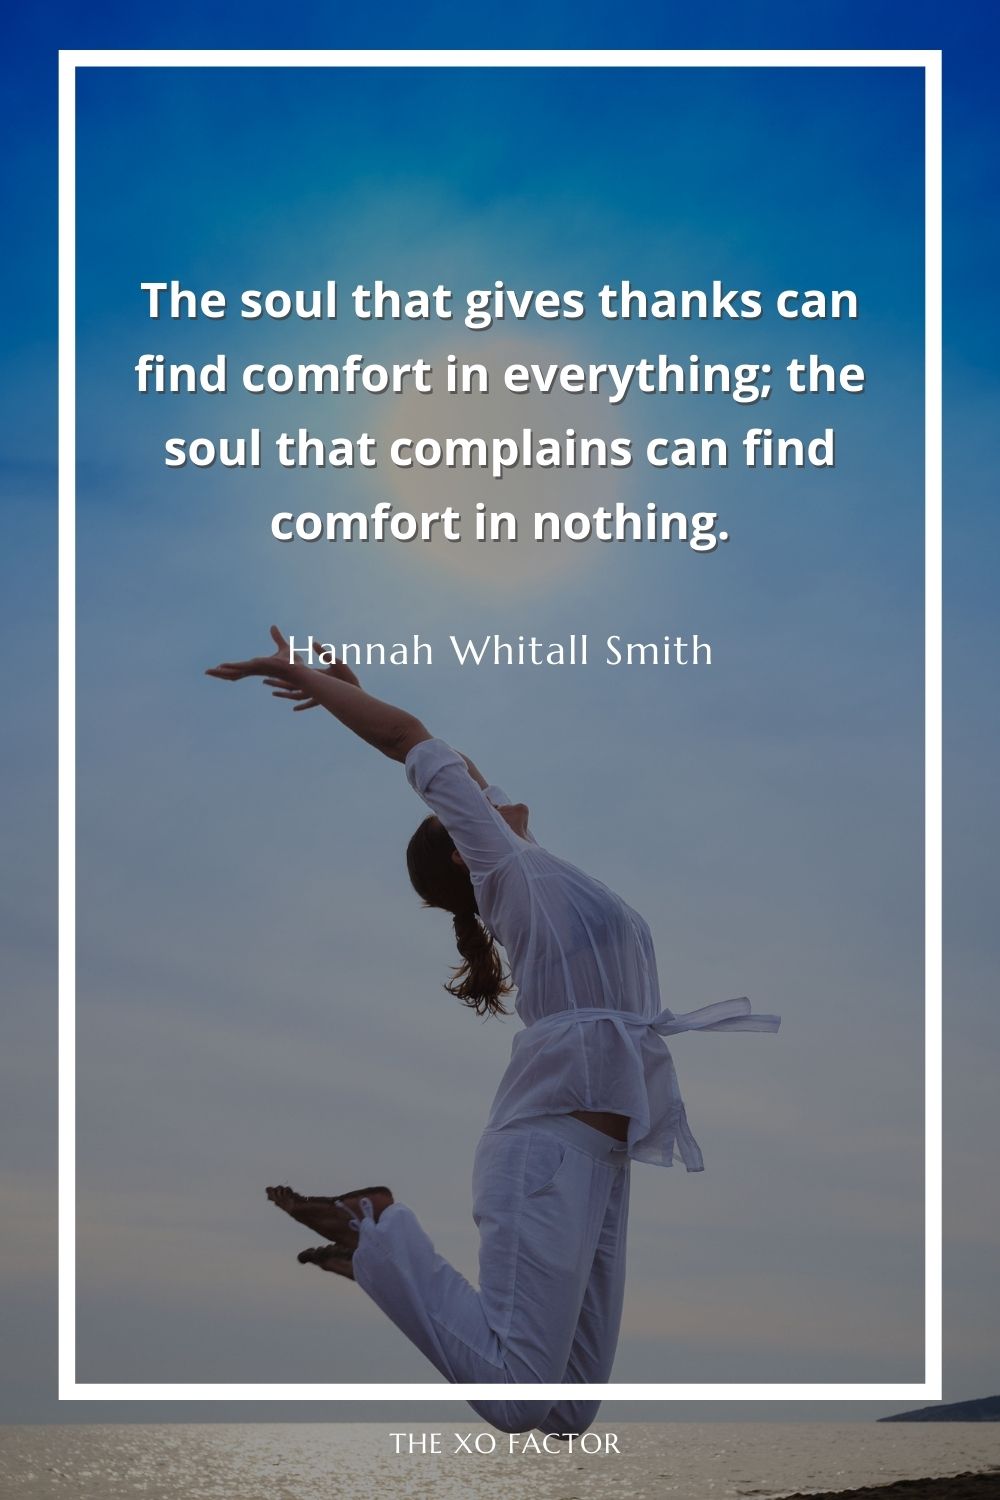 The soul that gives thanks can find comfort in everything; the soul that complains can find comfort in nothing.